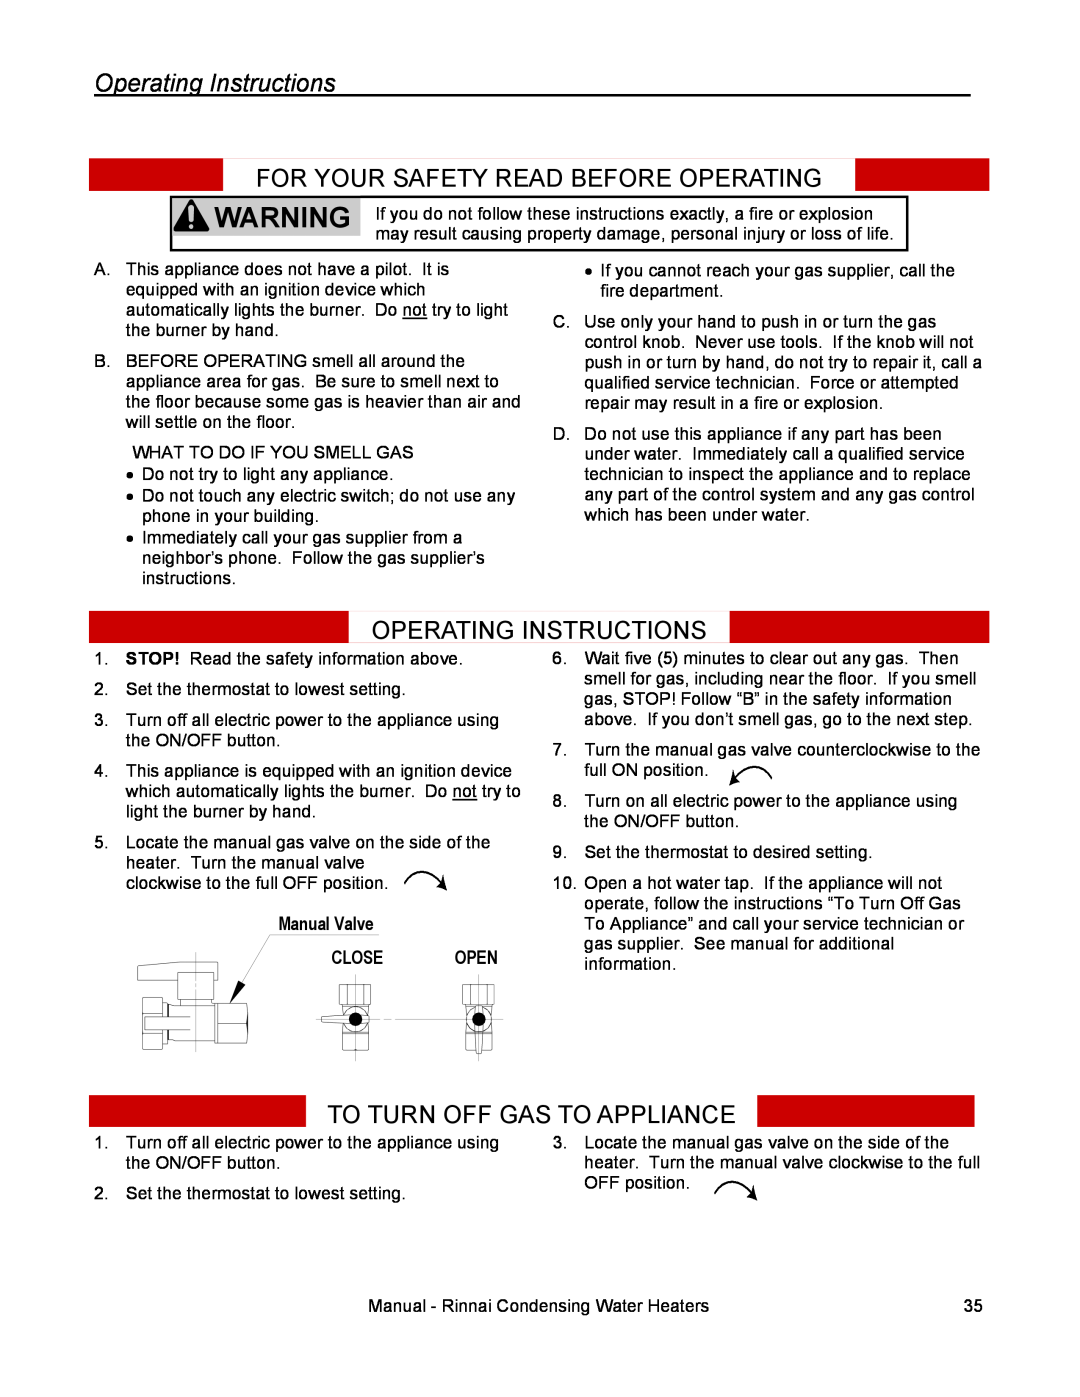 Rinnai RC98HPI, RC98HPE Operating Instructions, For Your Safety Read Before Operating, To Turn Off Gas To Appliance 